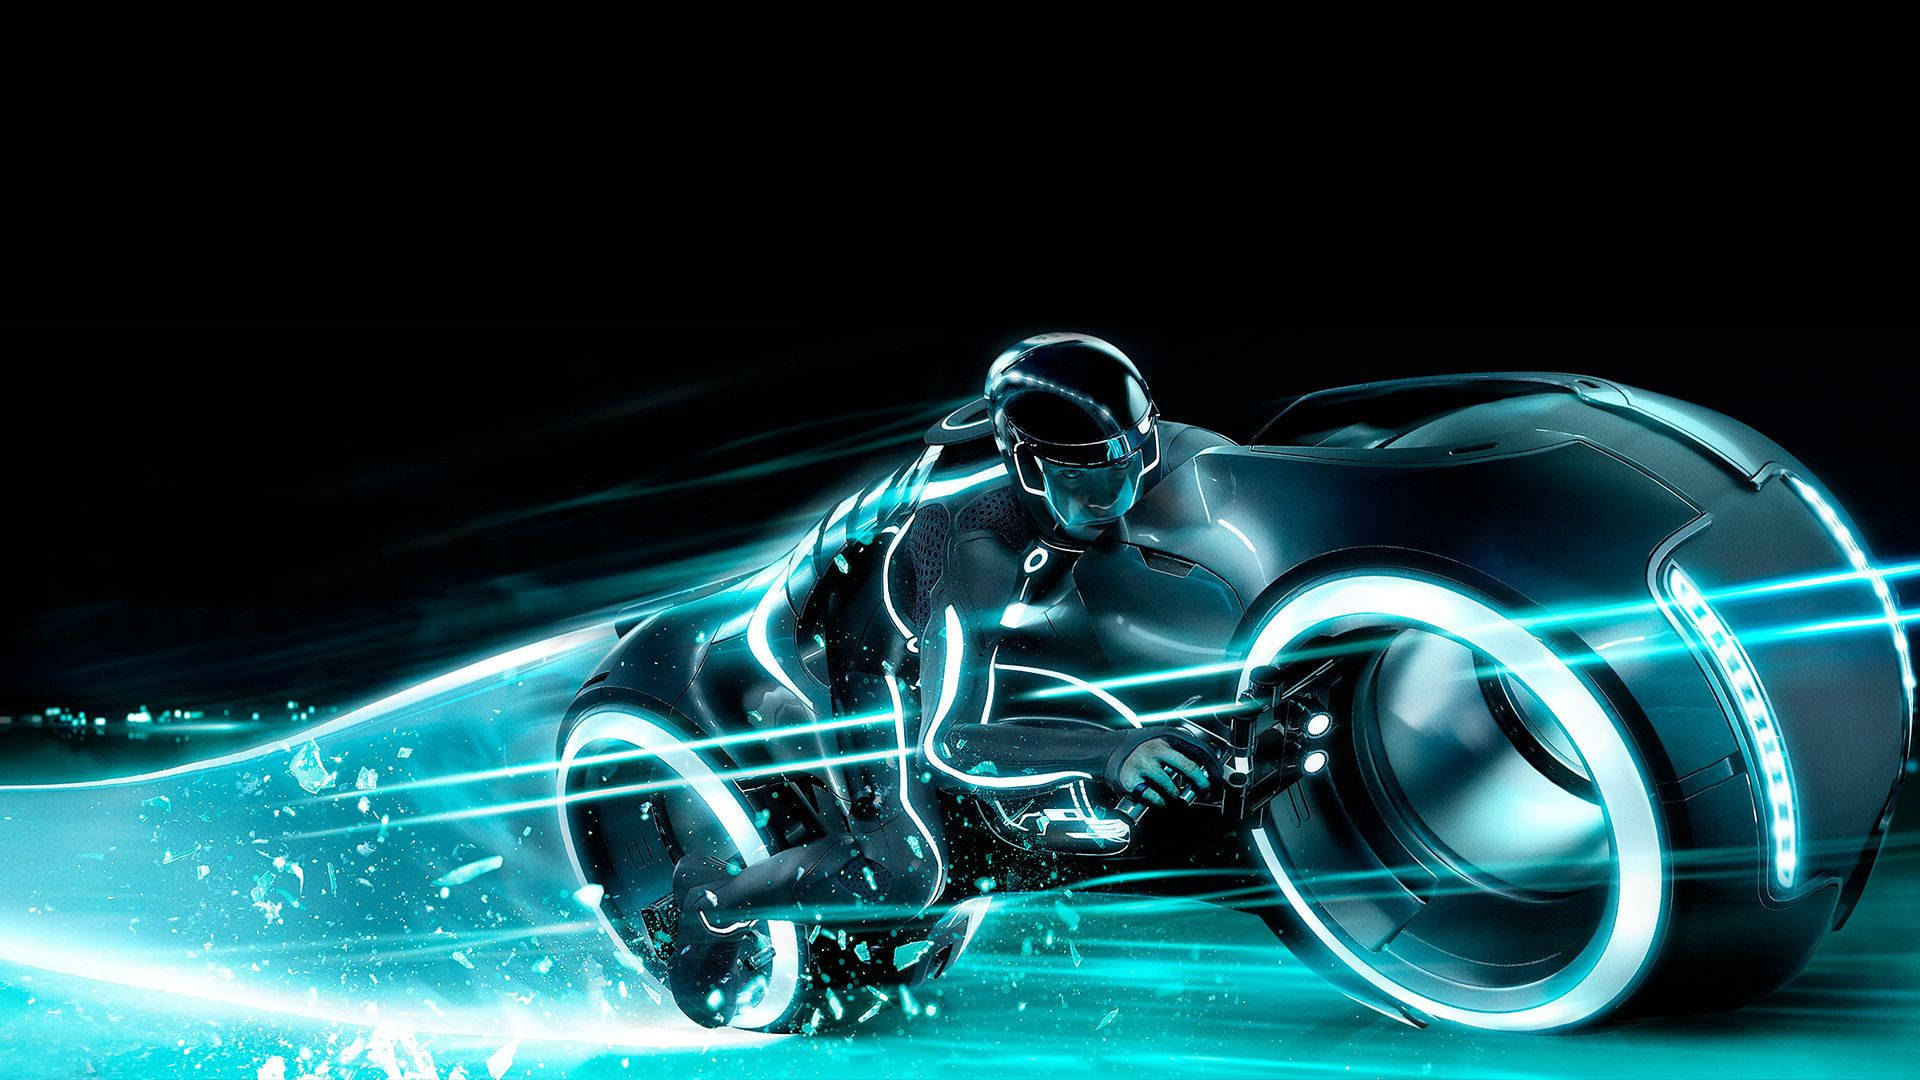 Tron 1920X1080 Wallpaper and Background Image